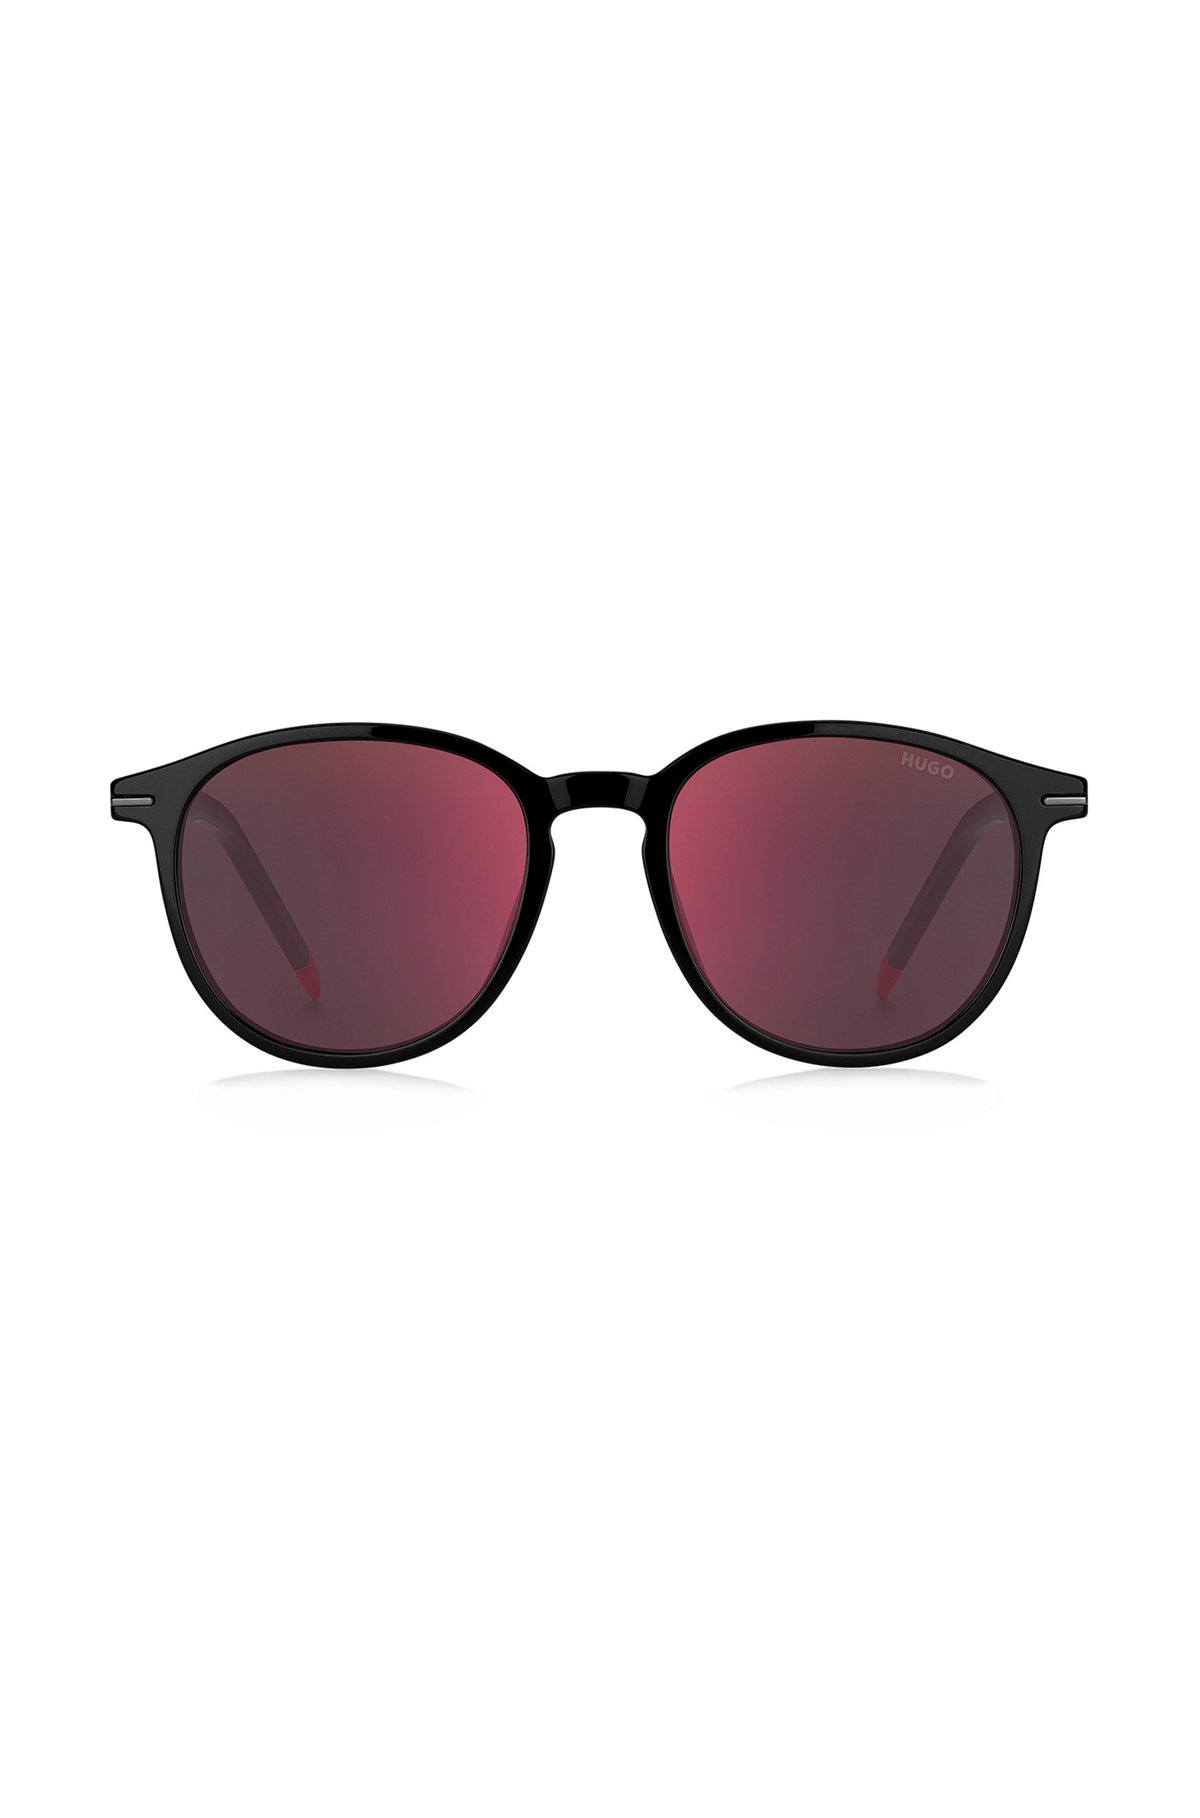 HUGO - Round sunglasses in black acetate with red details